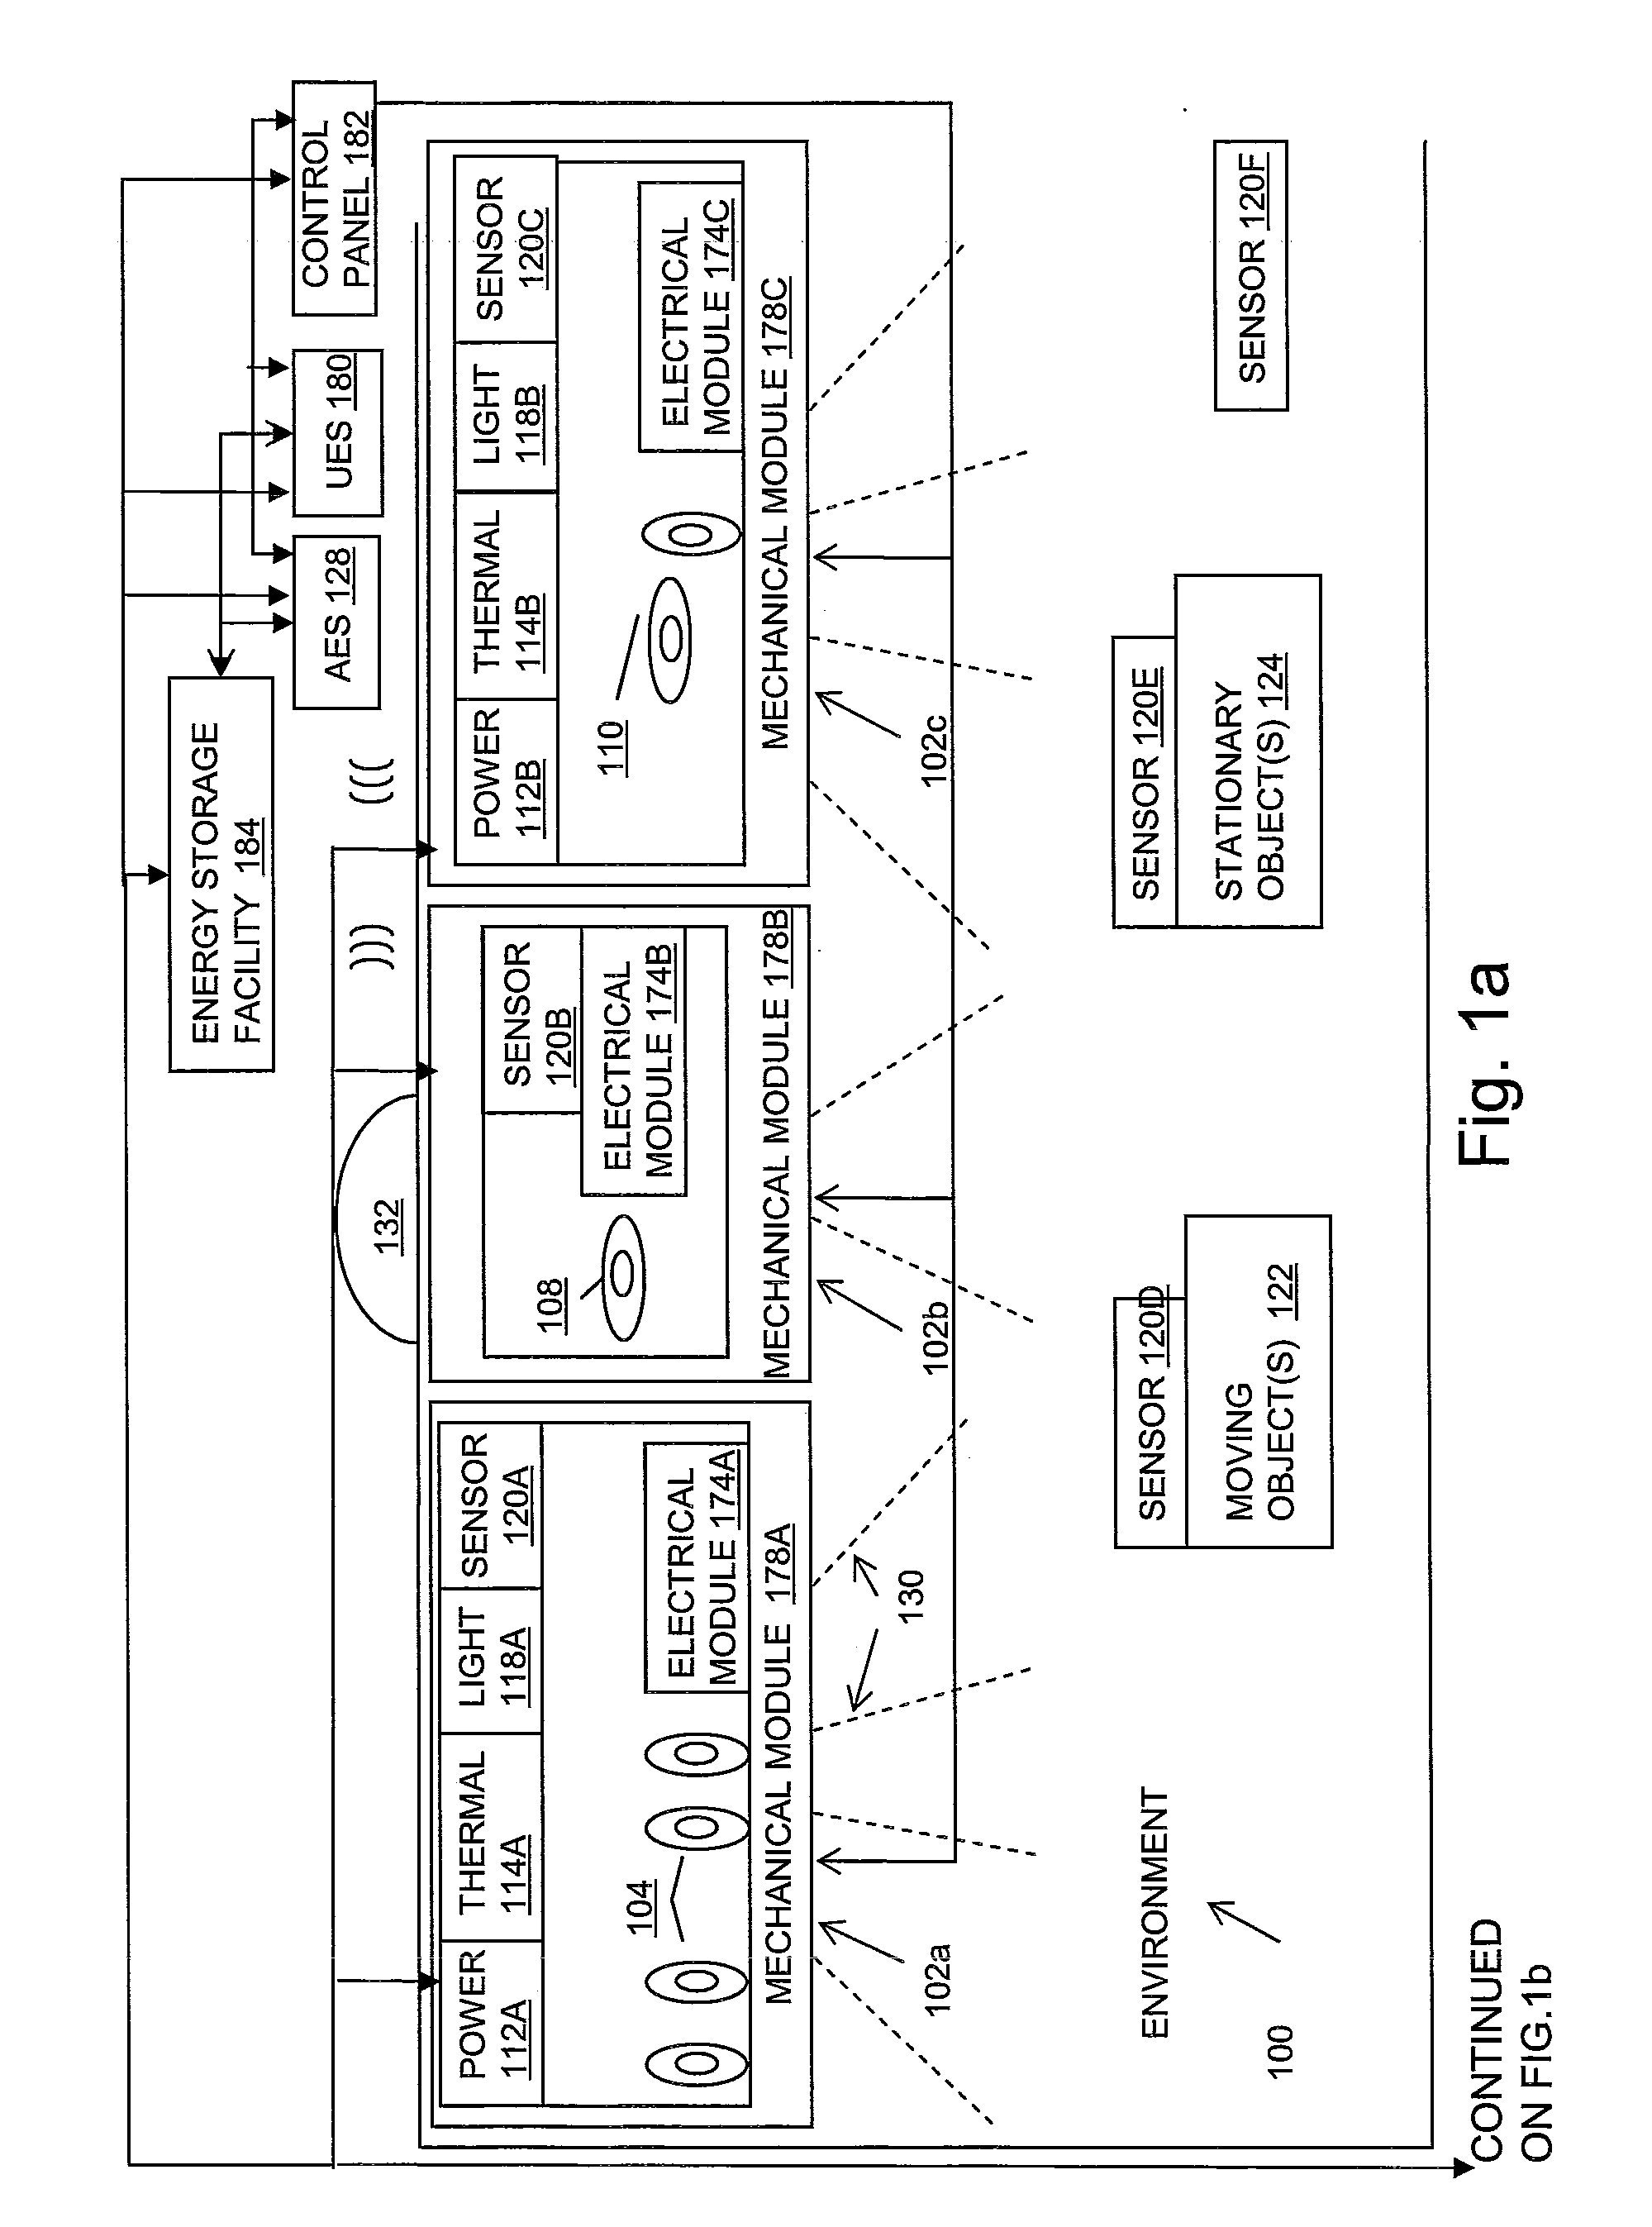 Power Management Unit with Adaptive Dimming